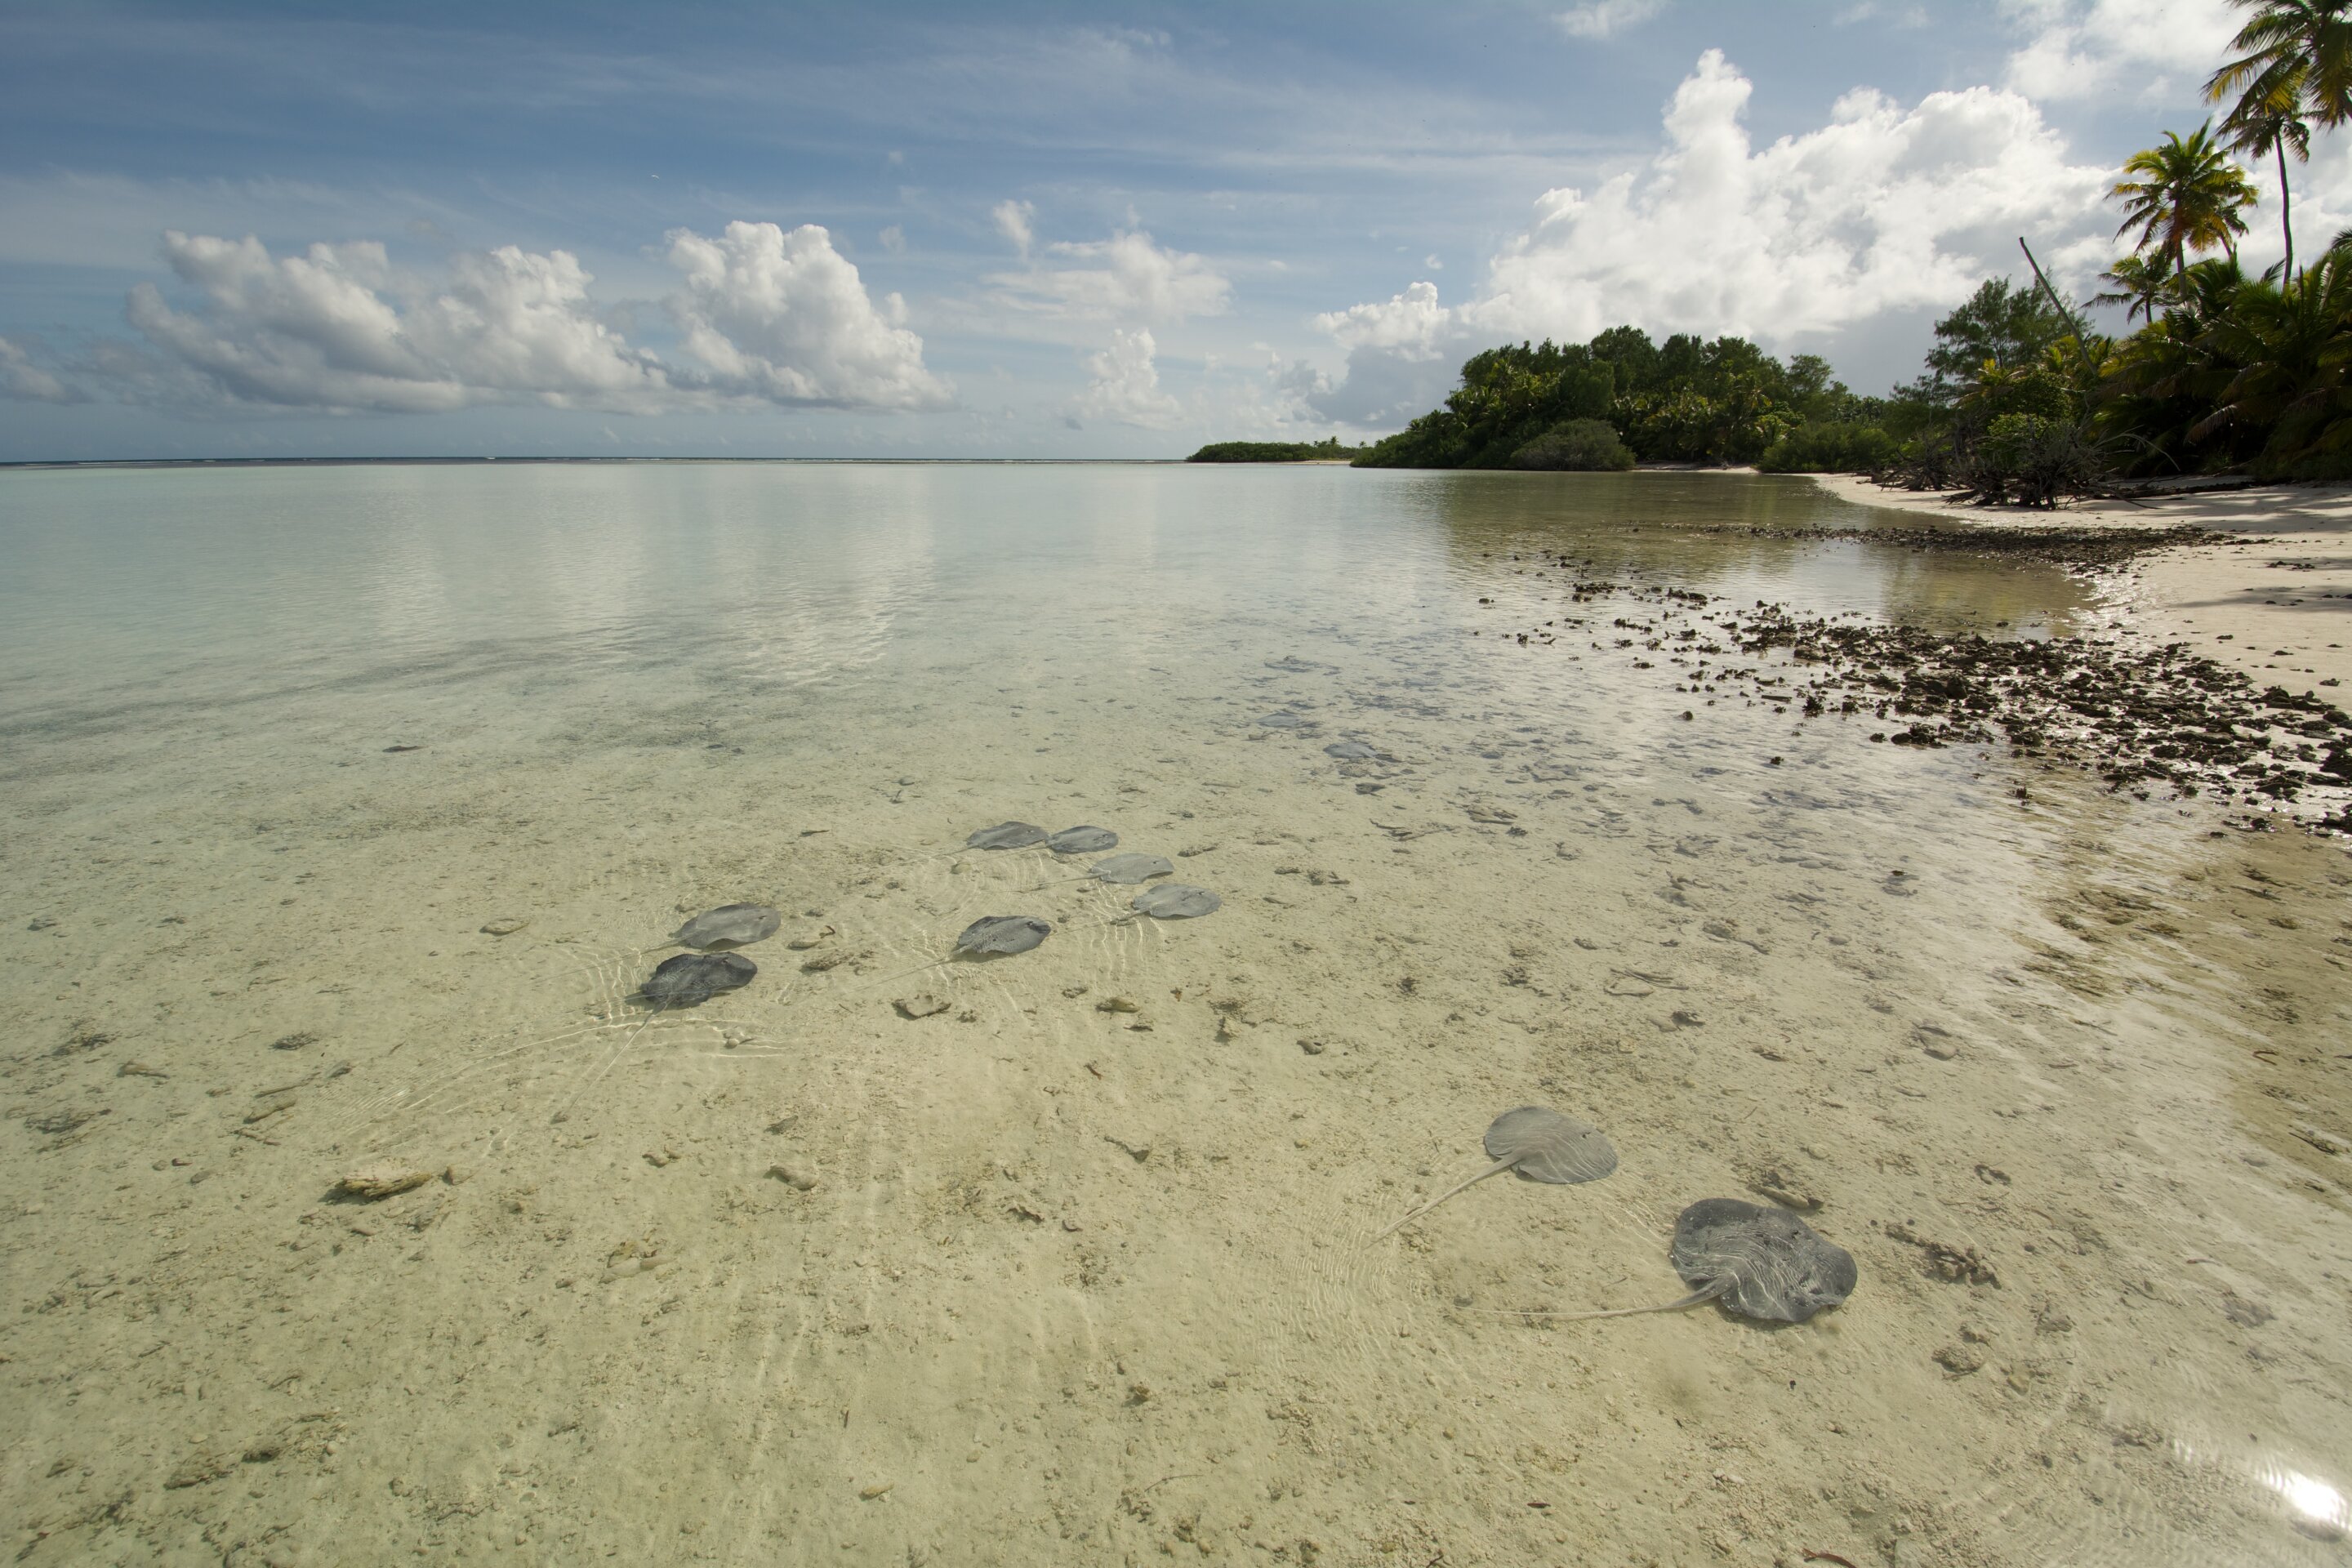 The sanctuary of the shallows: Climate change could affect where Seychelles' stingrays choose to live - Phys.org